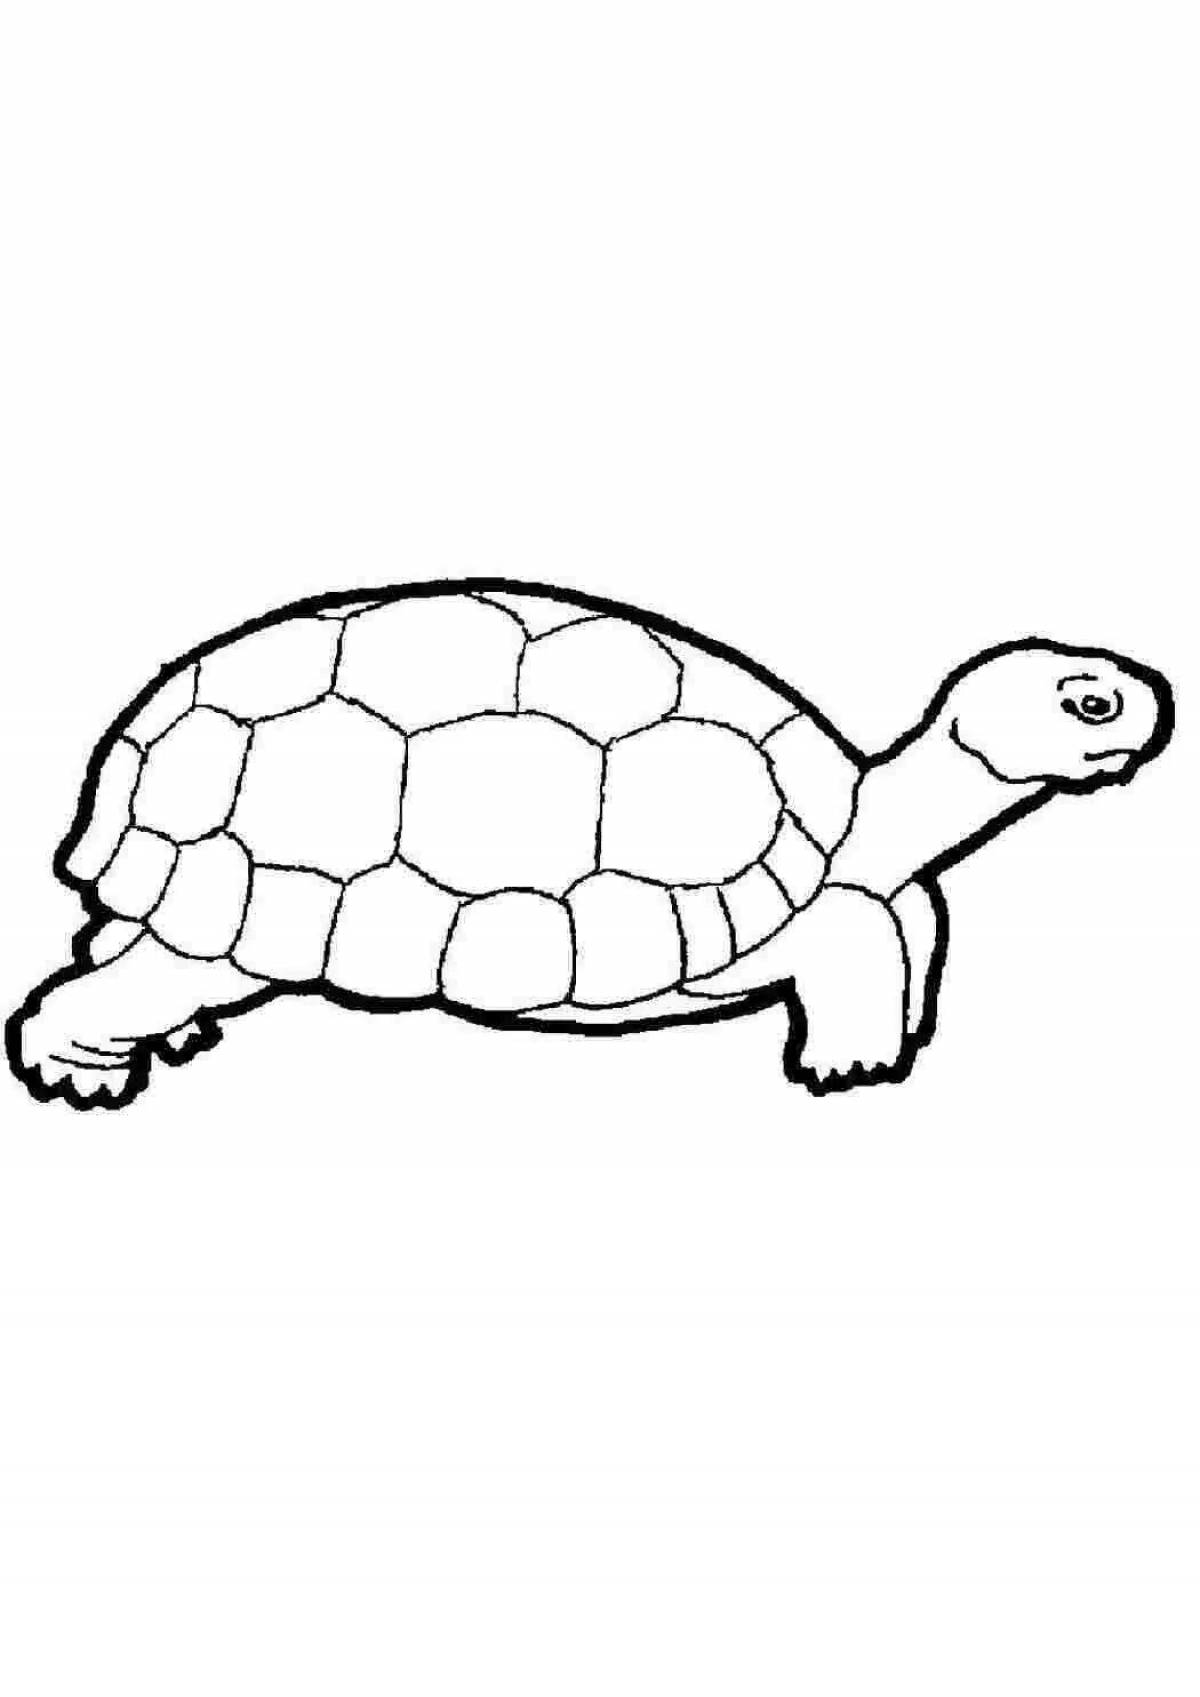 Turtle live coloring